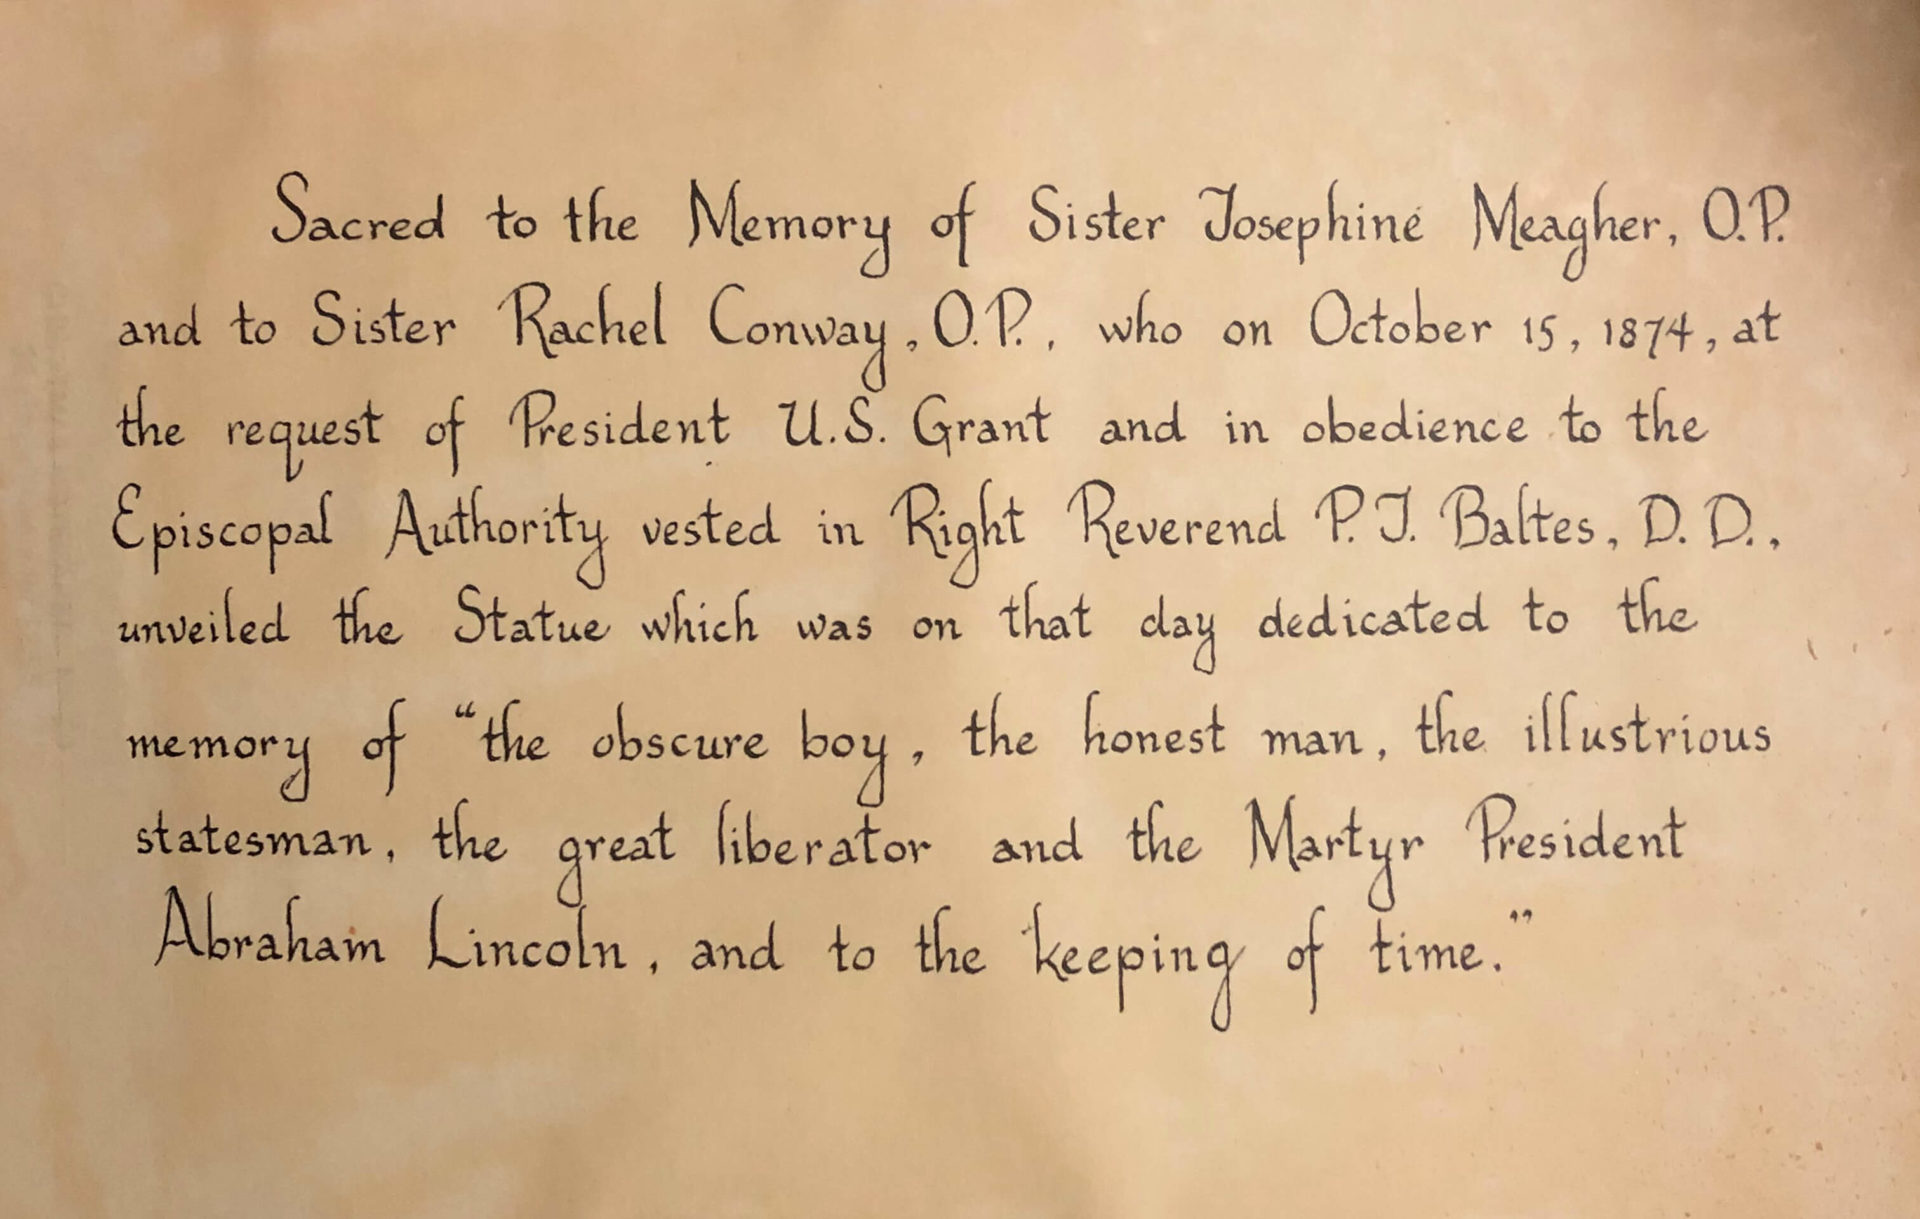 Sacred to the Memory of Sister Josephine Meagher, O.P. and the Sister Rachel Conway, O.P., who on October 15, 1847, at the request of President U.S. Grant and in obedience to the Episcopal Authority vested in Right Reverend P.J. Baltes, D.D., unveiled the Statue which was on that day dedicated to the memory of “the obscure boy, the honest man, the illustrious statesman, the great liberator and Martyr President Abraham Lincoln, and to the keeping of time.” 